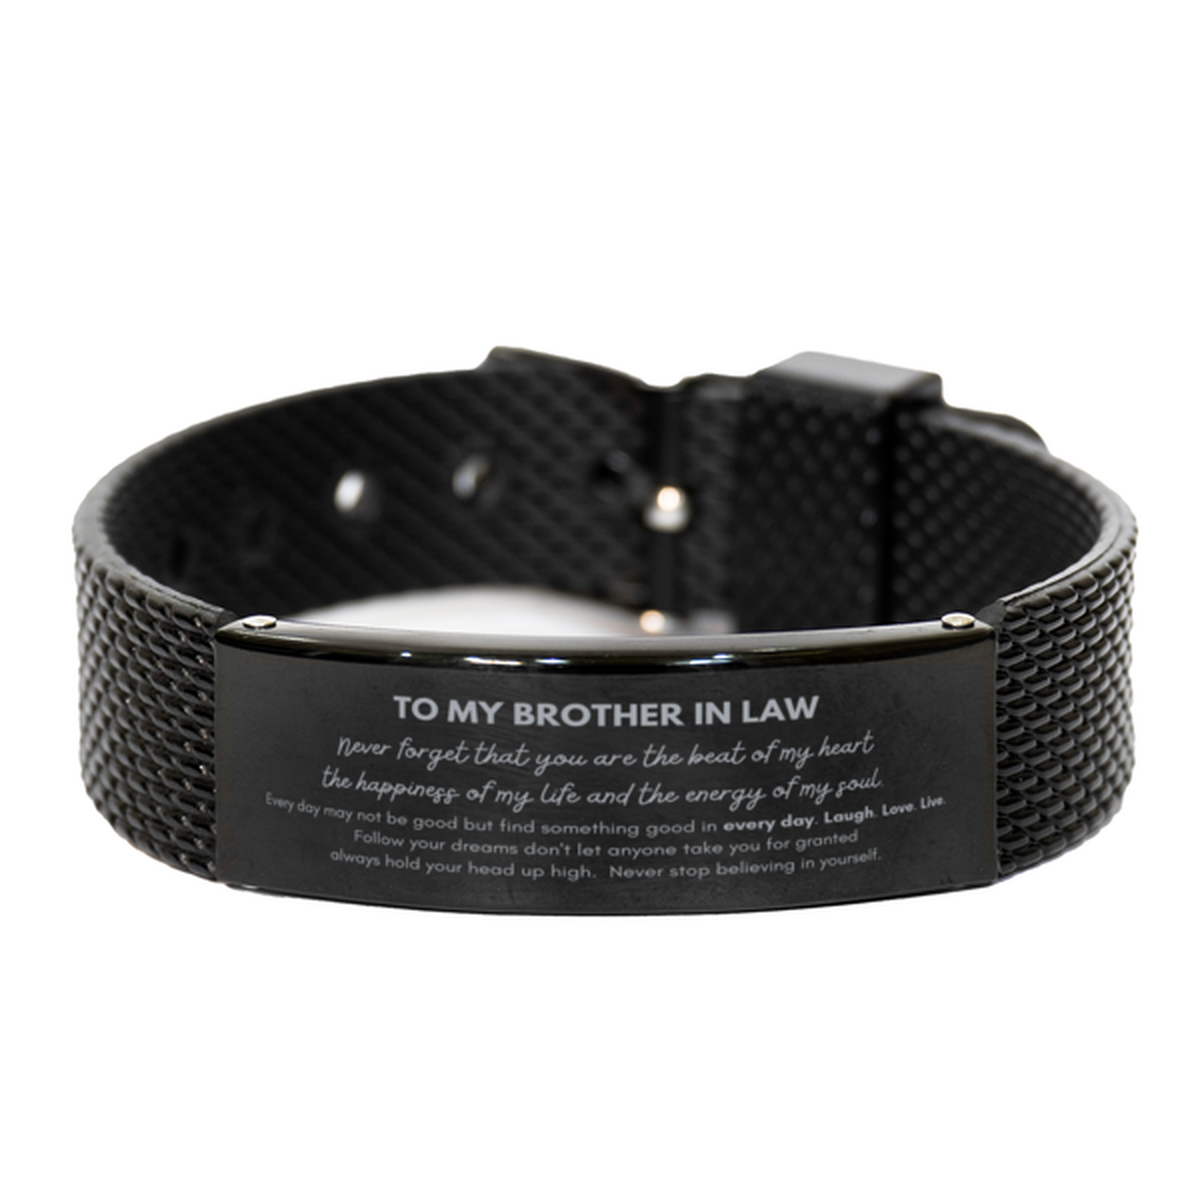 To My Brother In Law Bracelet Gifts, Christmas Brother In Law Black Shark Mesh Bracelet Present, Birthday Unique Motivational For Brother In Law, To My Brother In Law Never forget that you are the beat of my heart the happiness of my life and the energy o